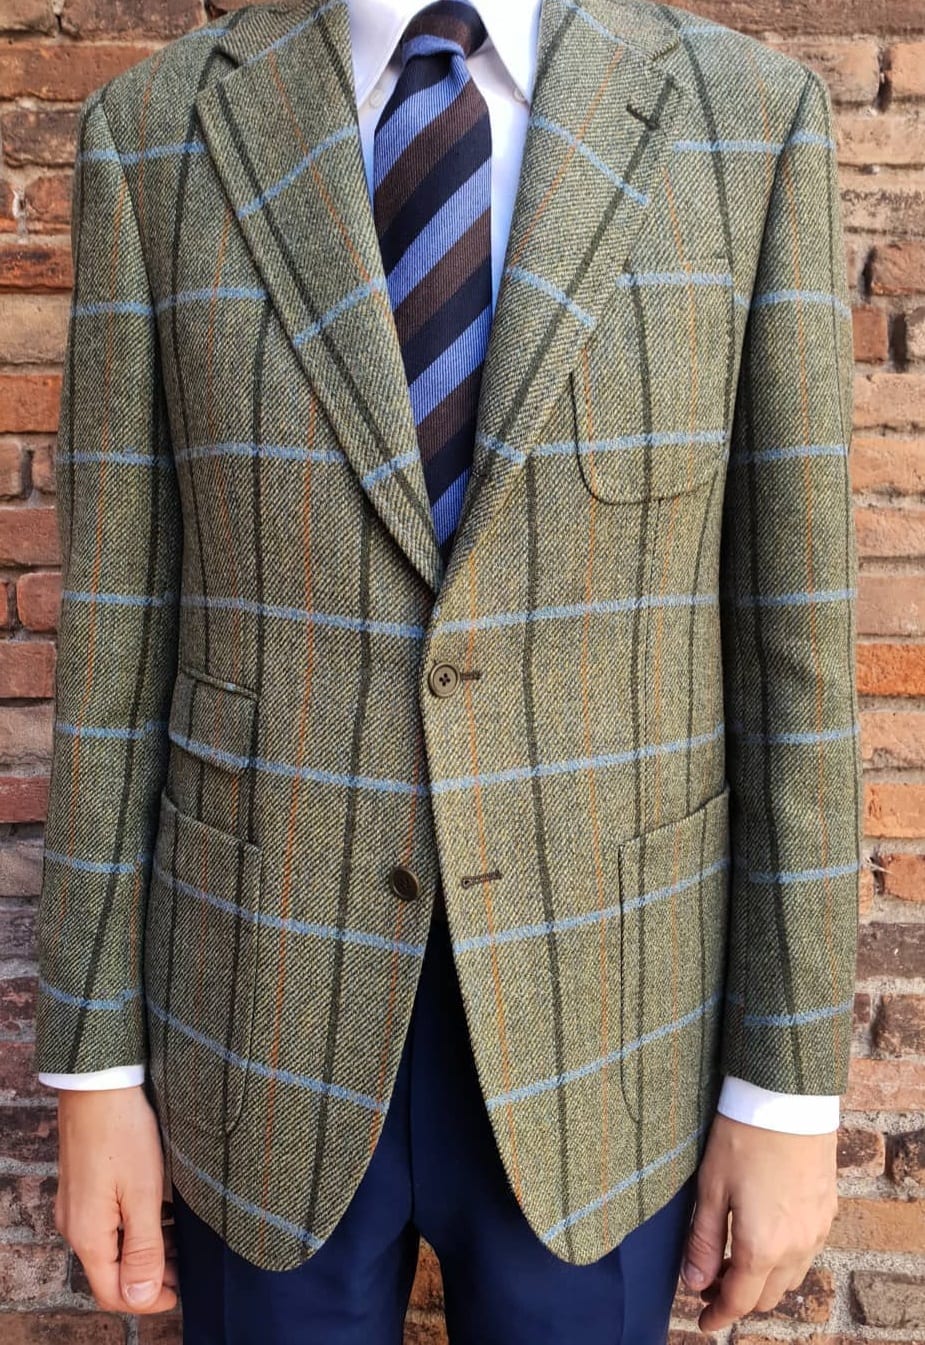 Tweed Jacket Outfit for Men 2019